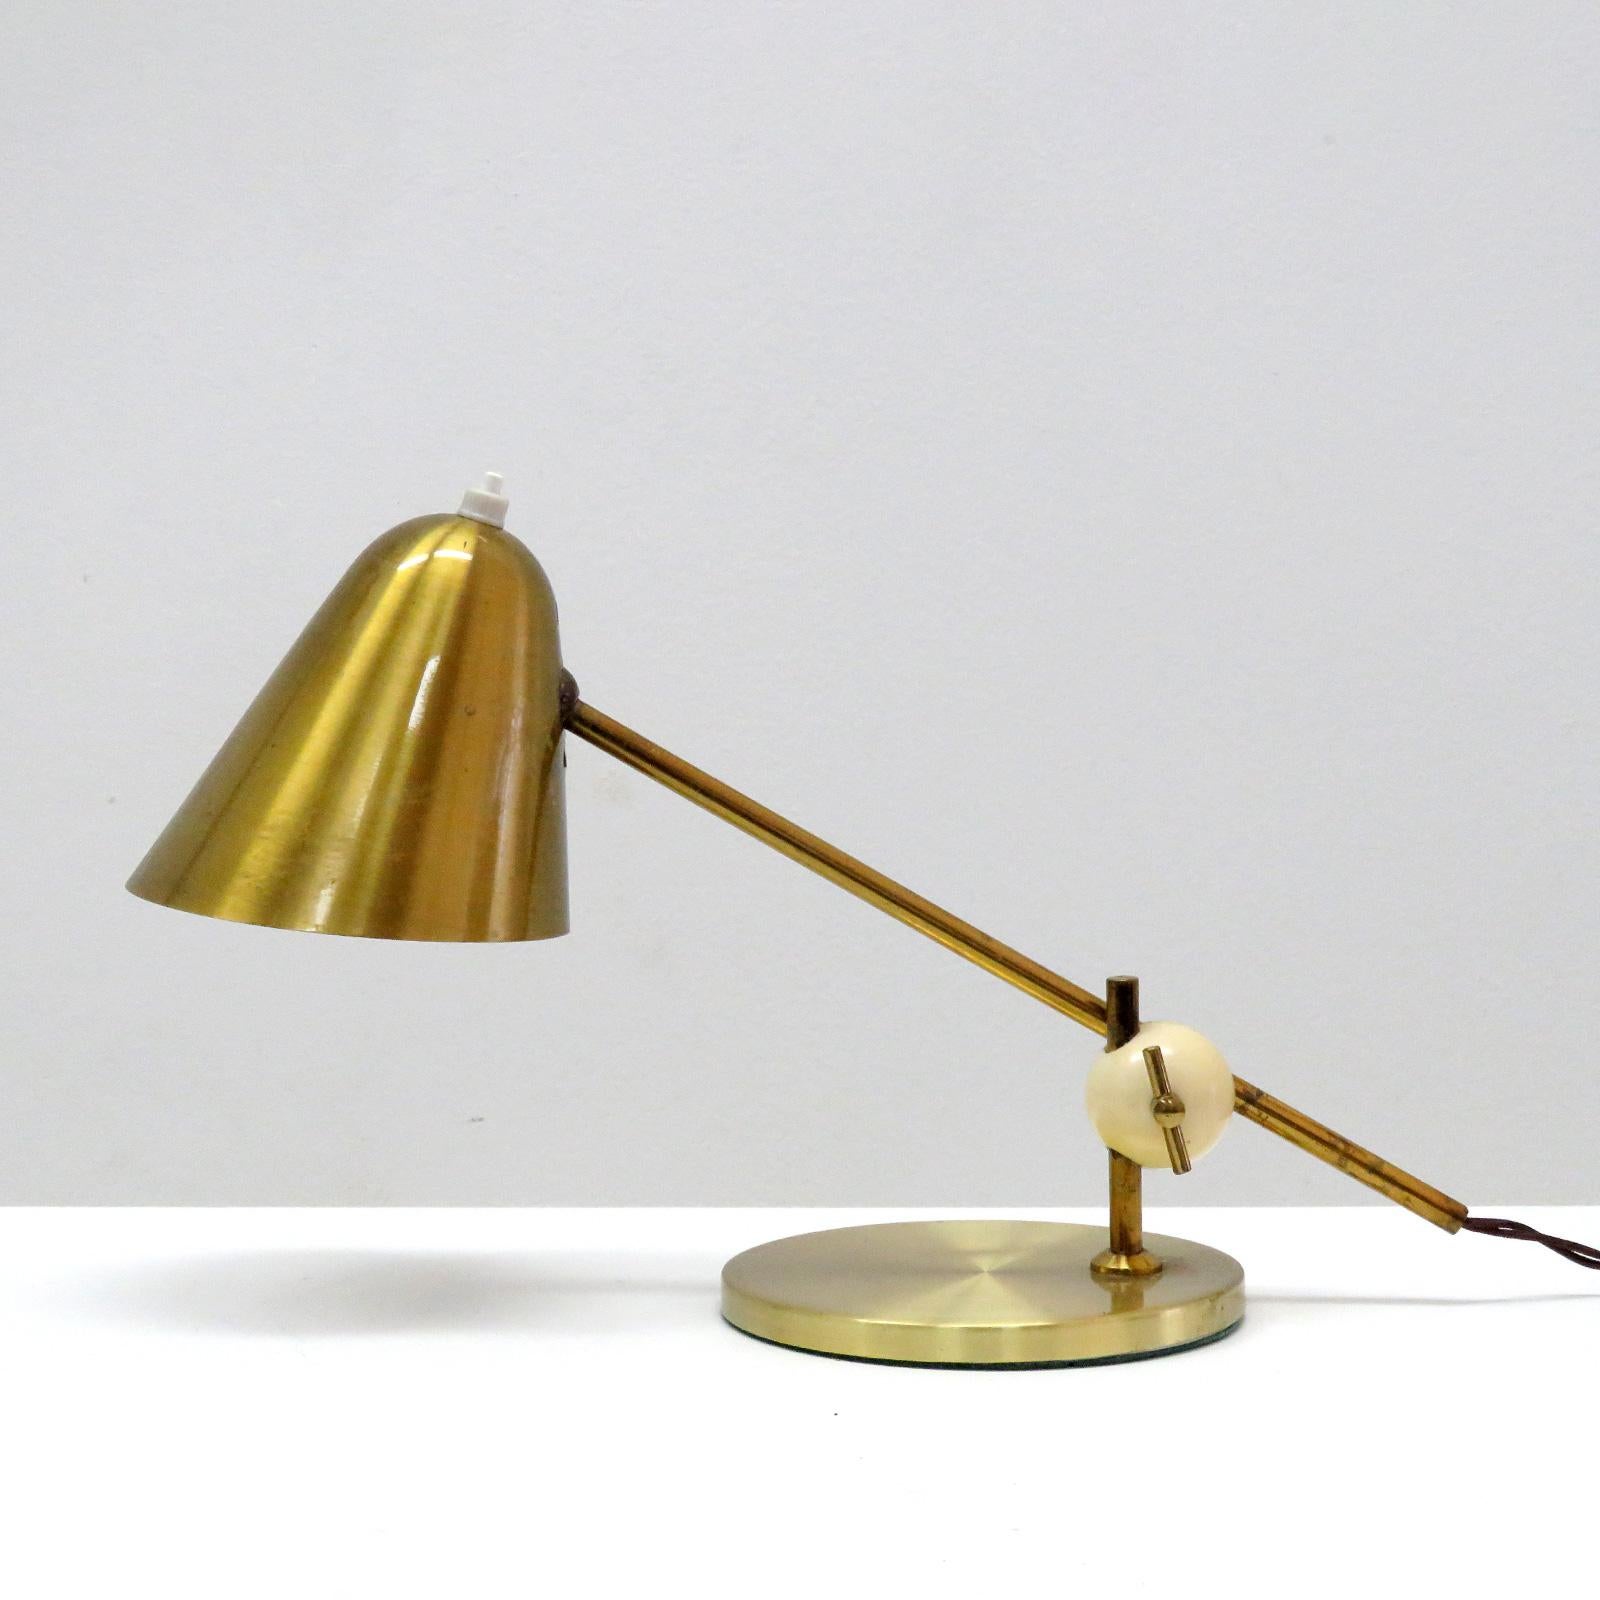 Wonderful brass table lamp by Jacques Biny with wonderful patina, adjustable at the hood and the white bakelite ball joint, wired for US standards, one E12 socket per fixture, max. wattage 60w each.